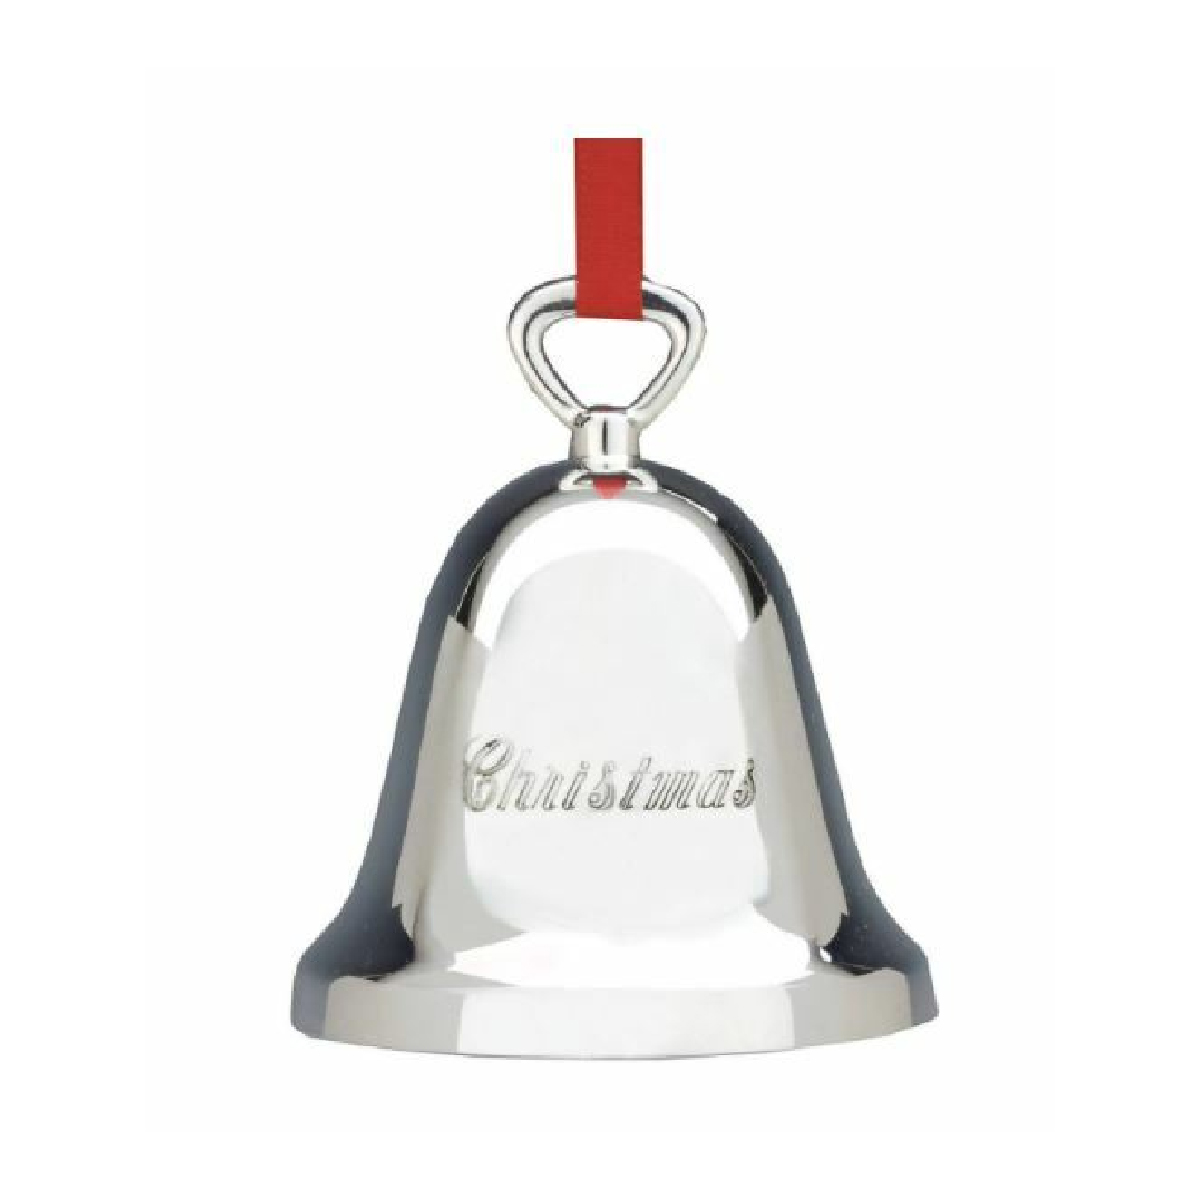 Reed & Barton - Ringing in the Season Silver Plated "Christmas" Bell Ornament